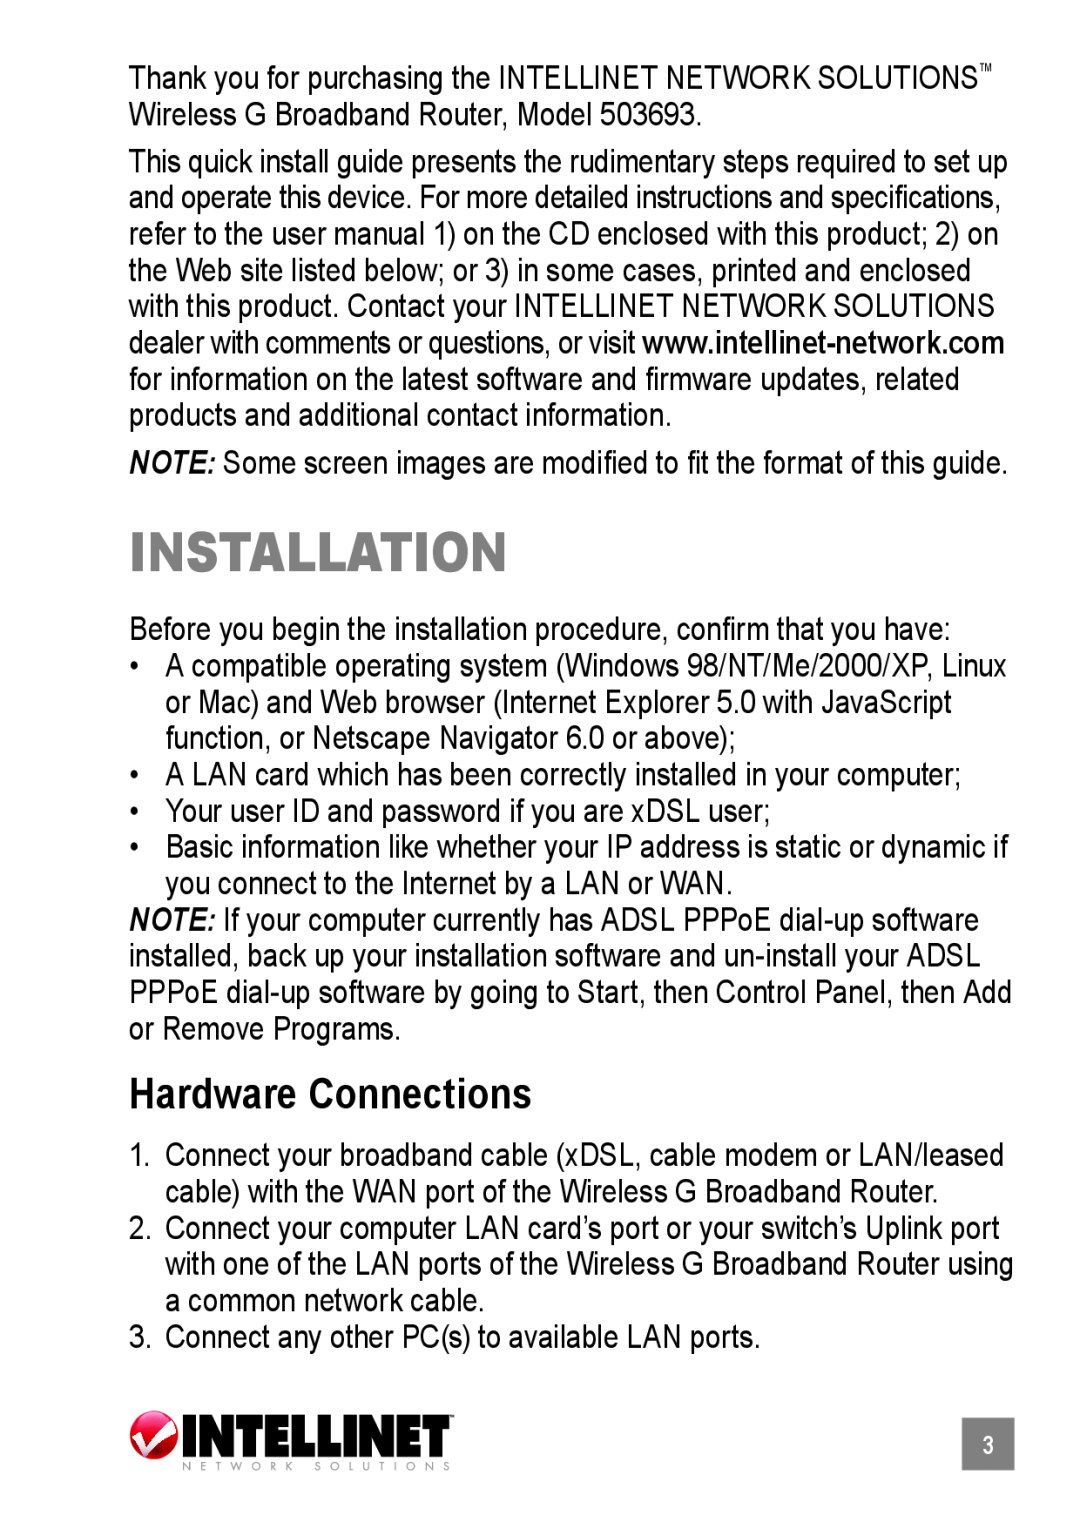 Intellinet Network Solutions 503693 manual Hardware Connections, installation 